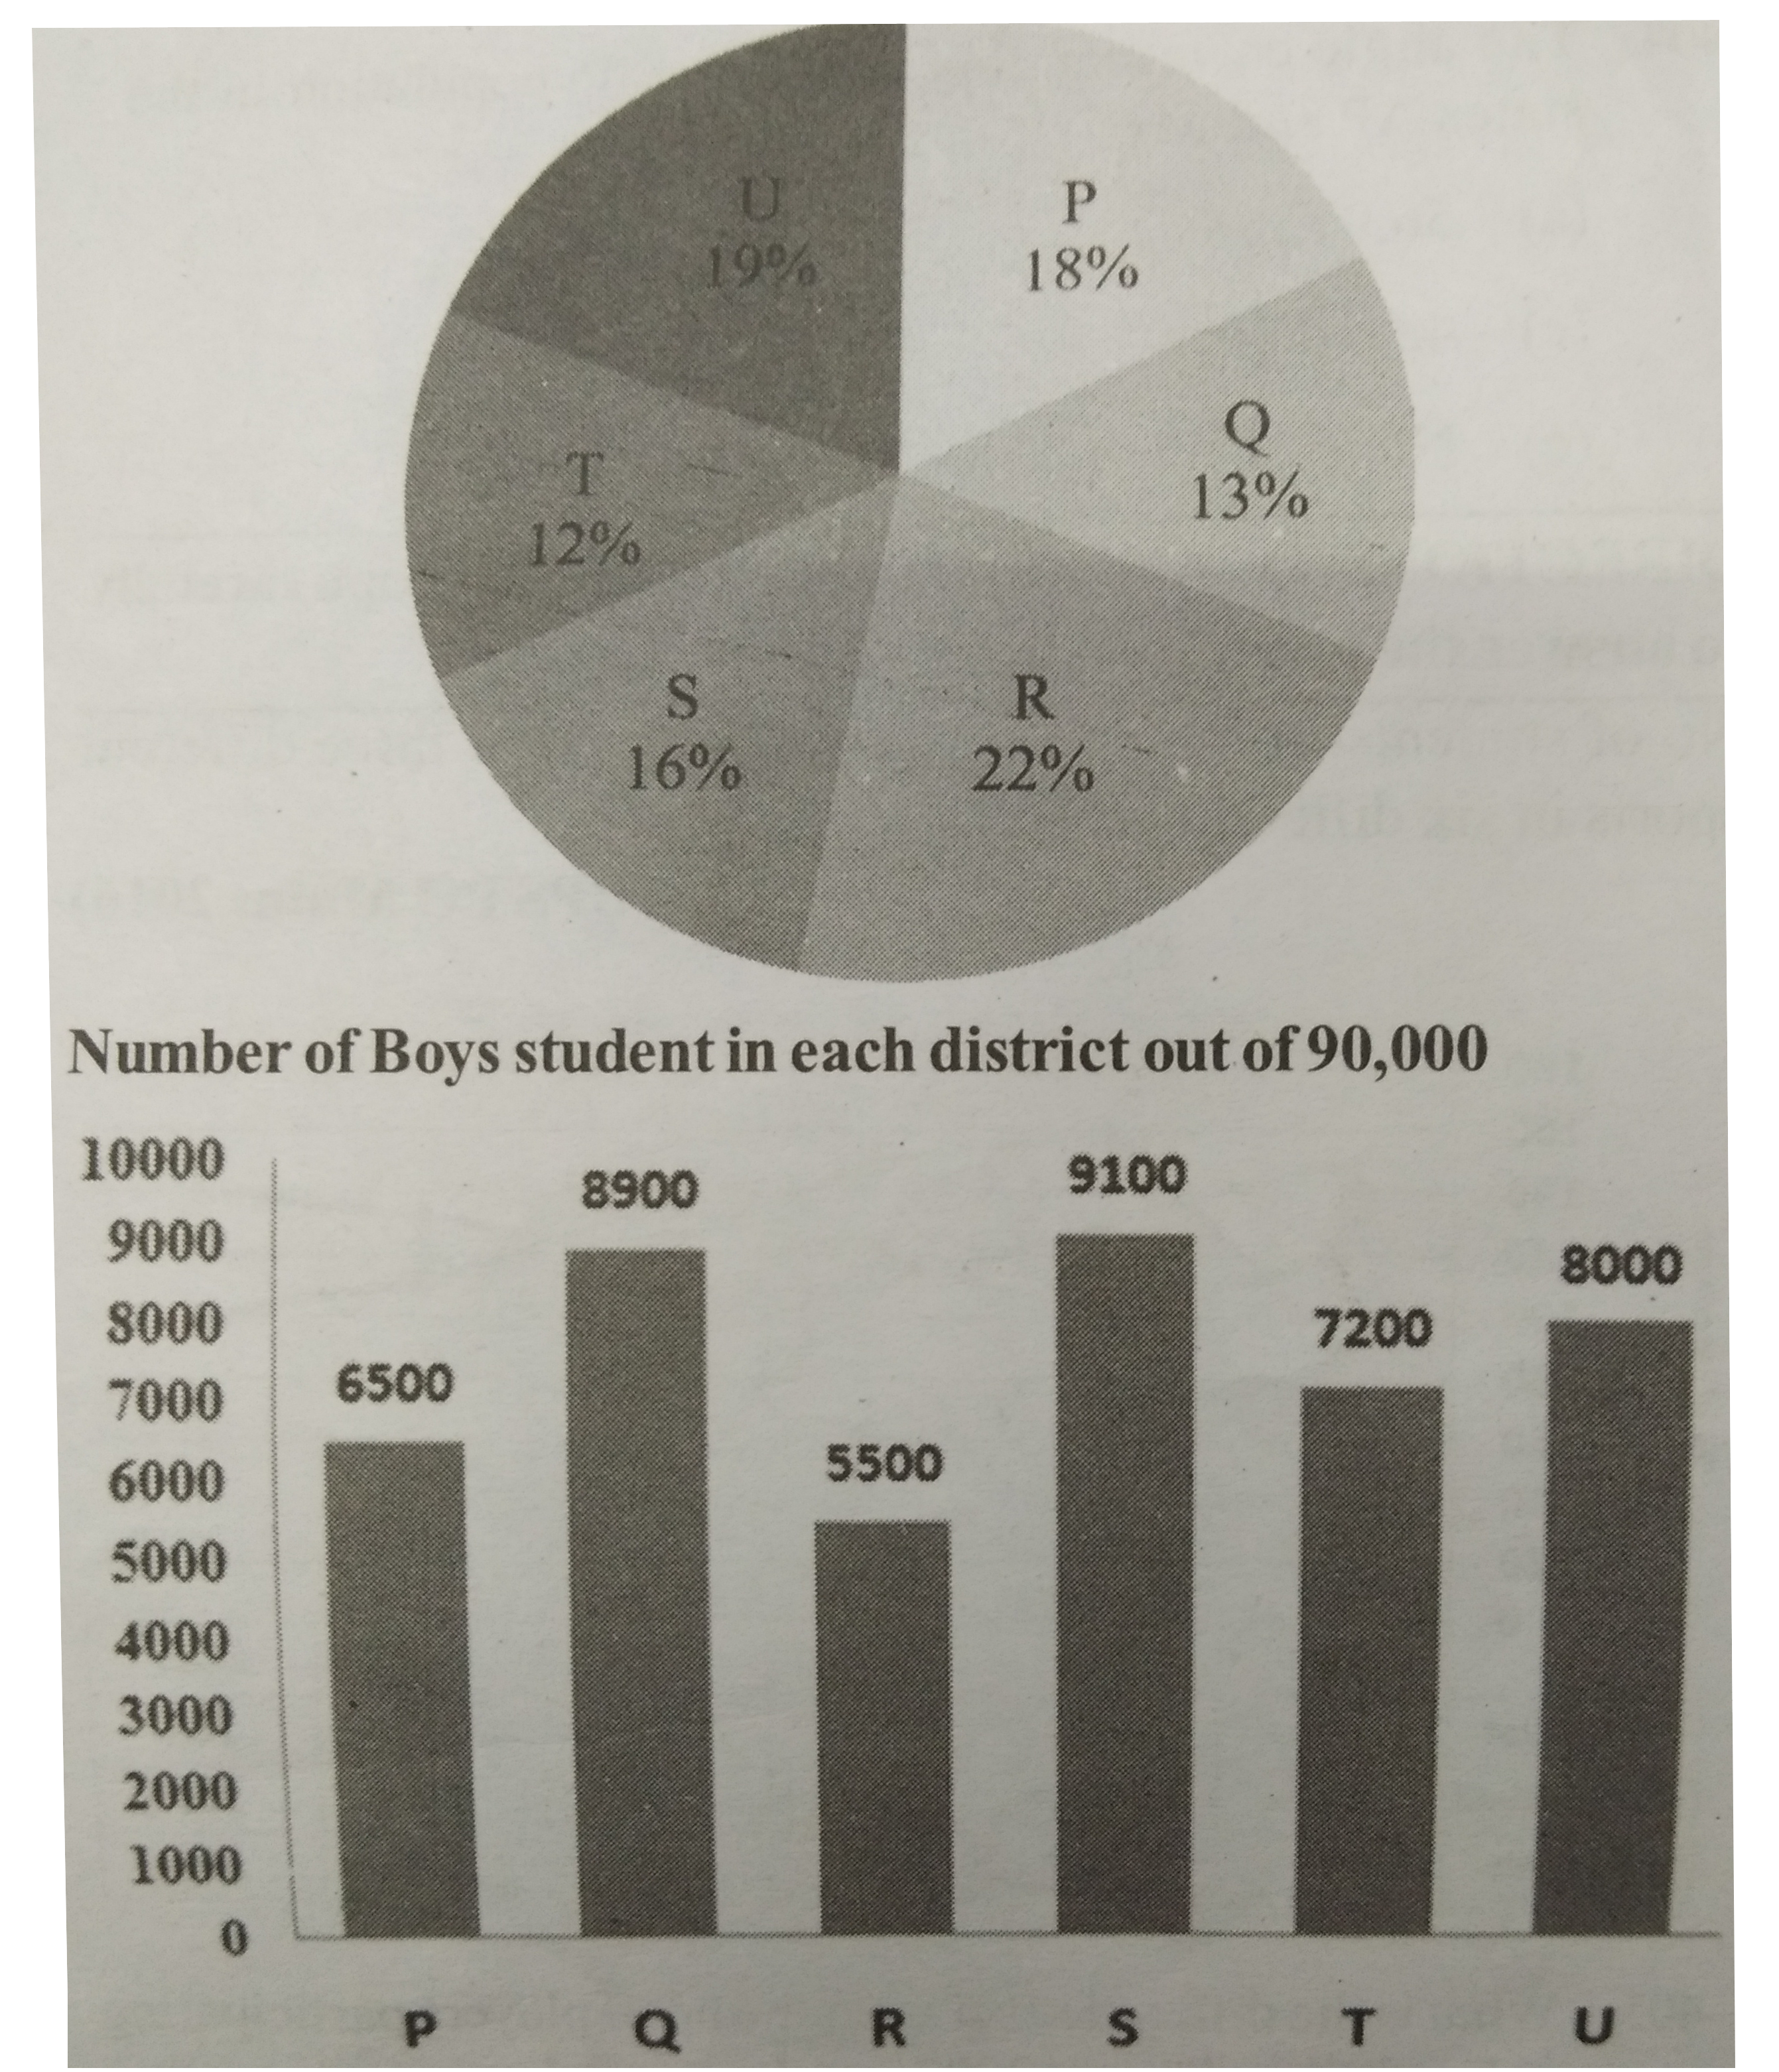 What is the average number of boys students in all the districts together ?